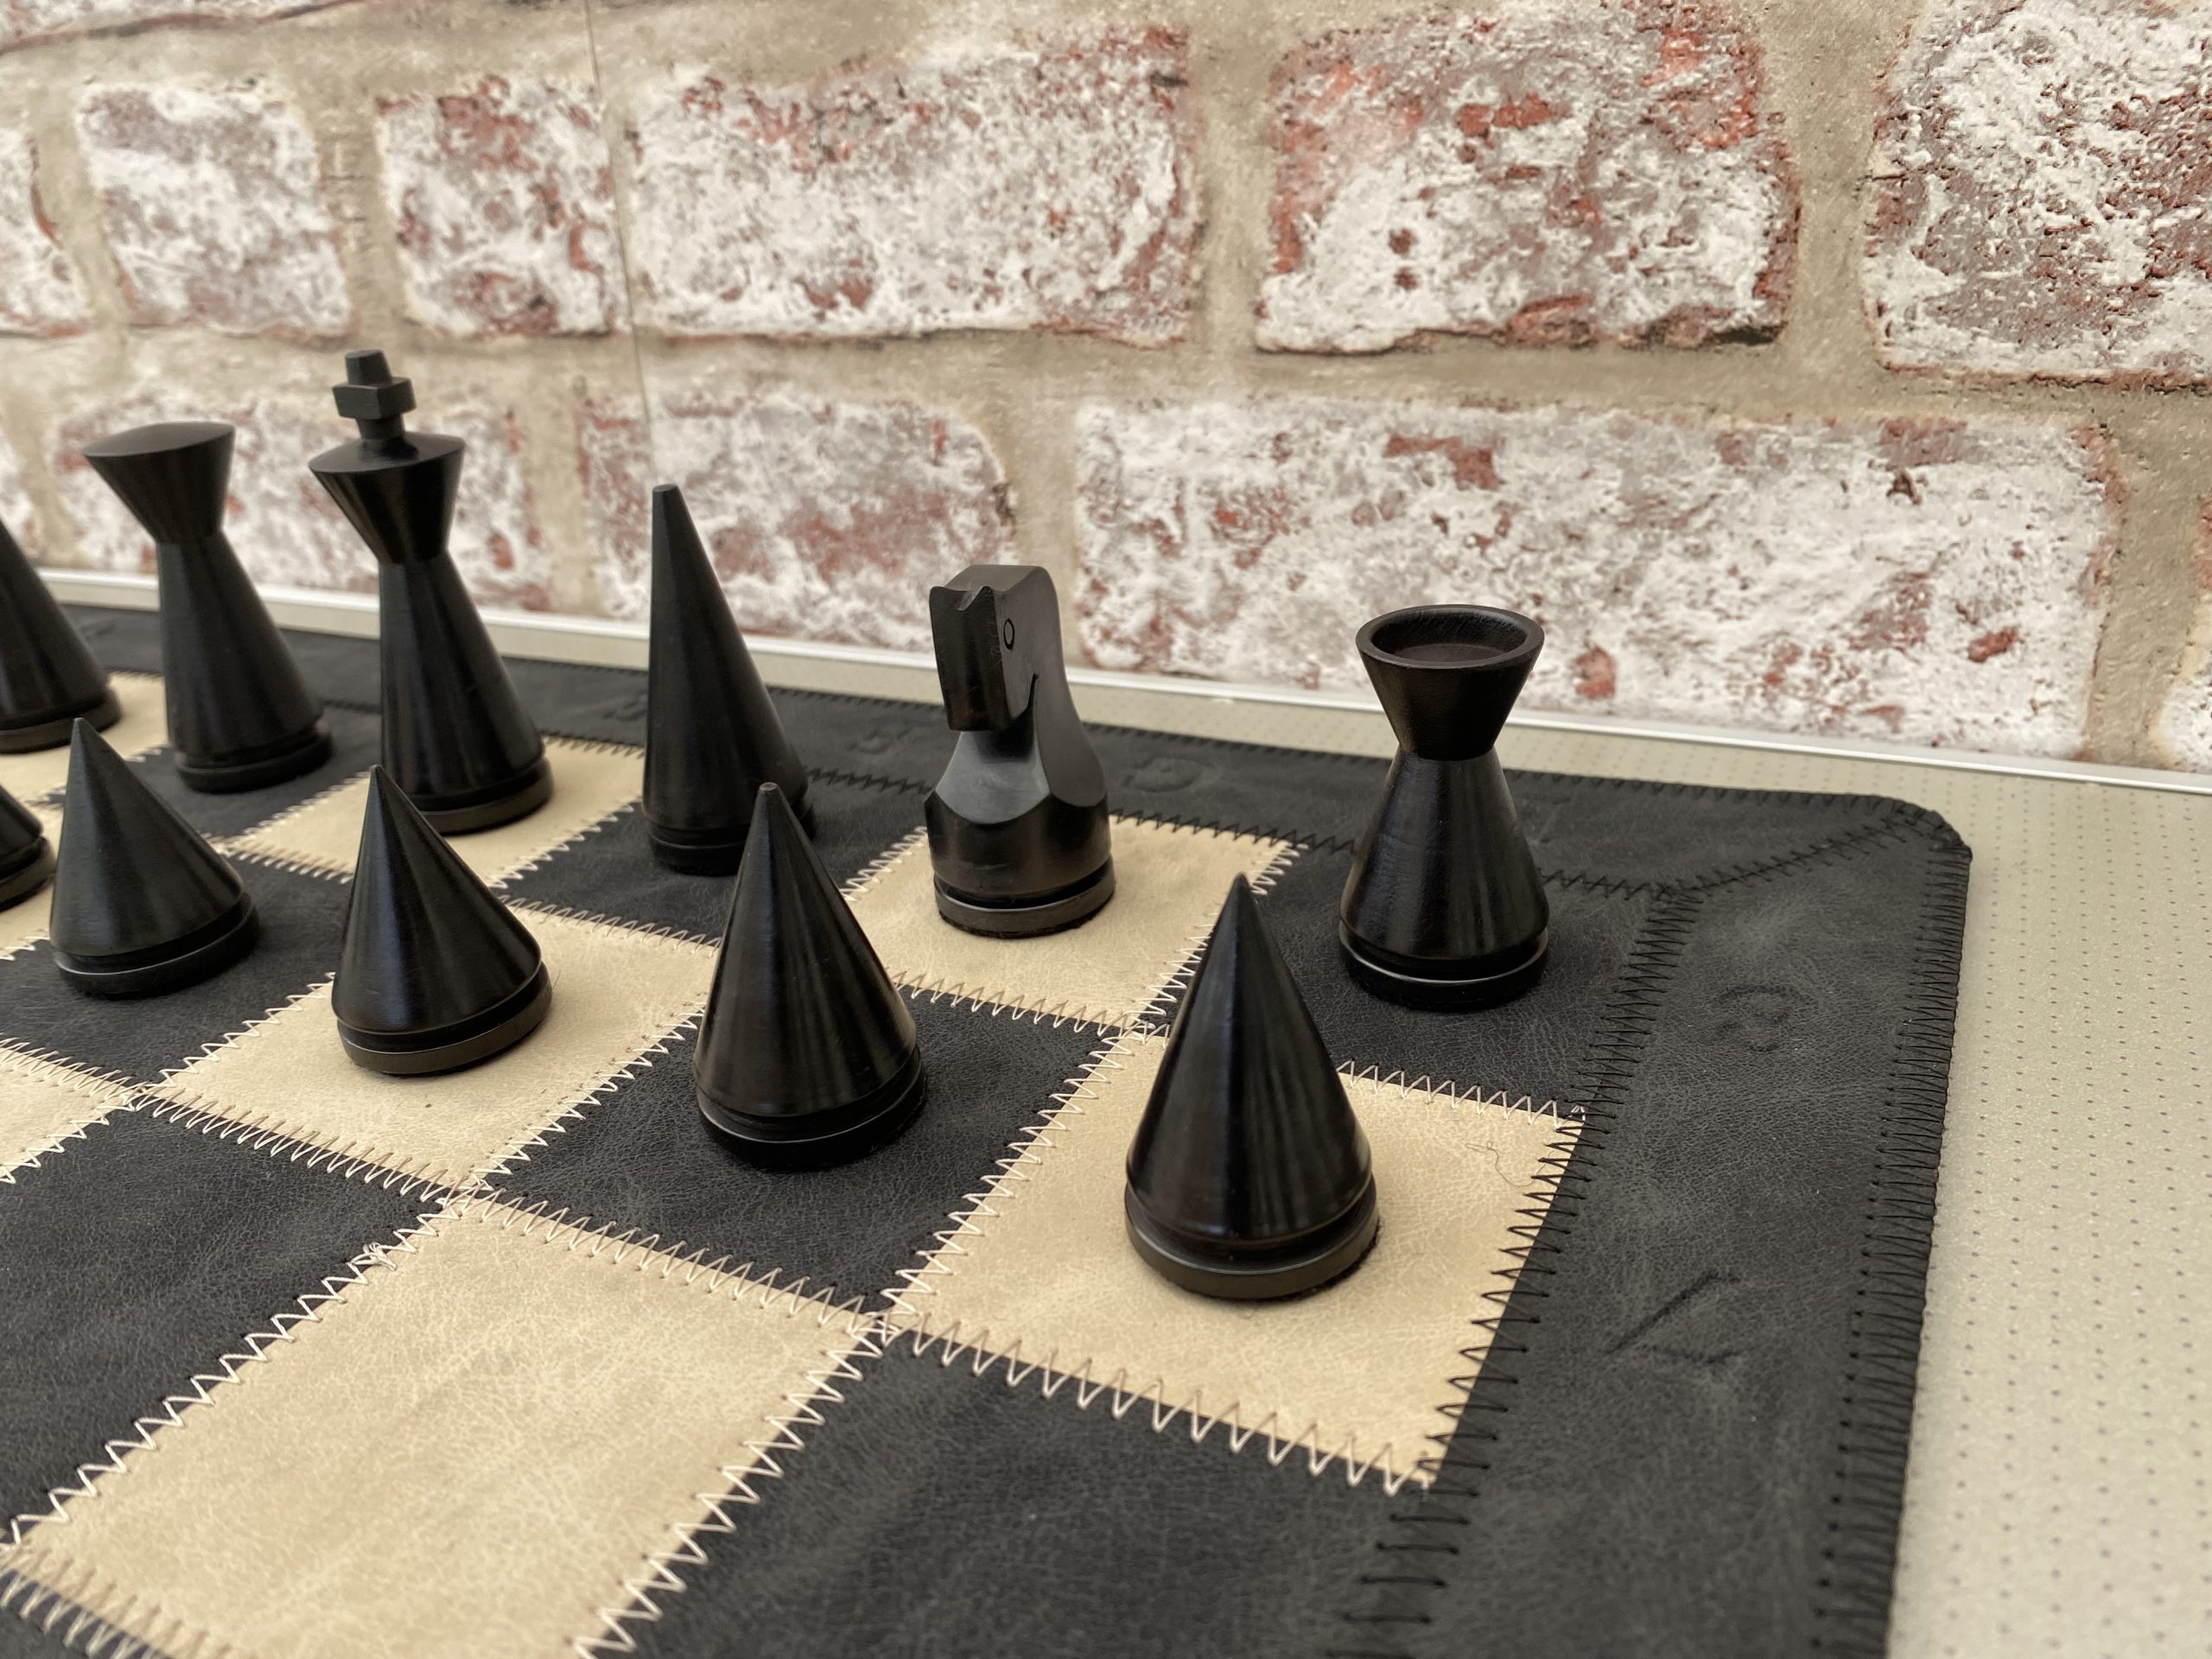 Black white chess king project chess pieces chess floor chess